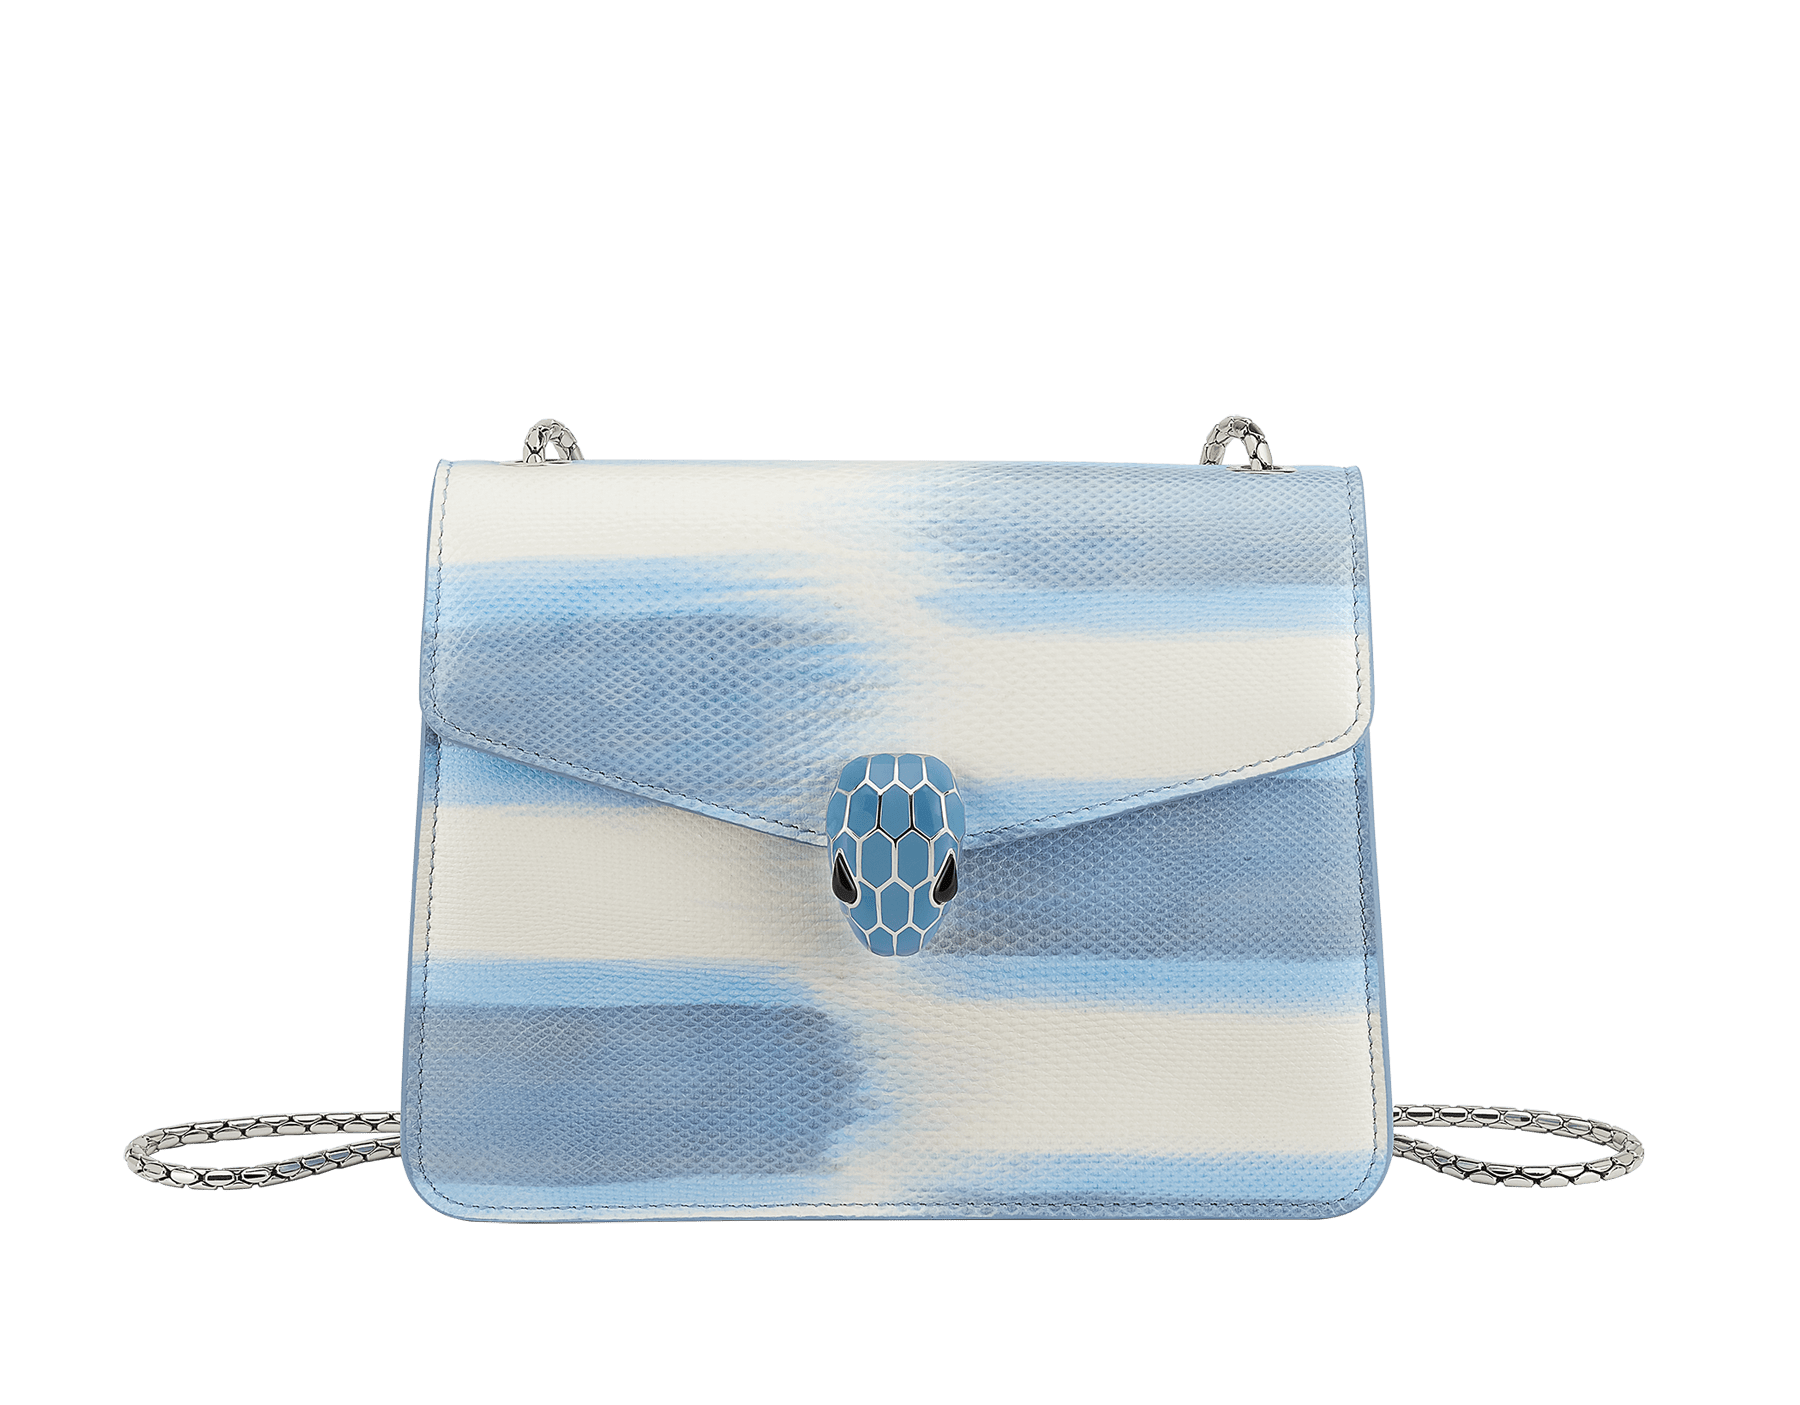 “Serpenti Forever” crossbody bag in multicolor "Shaded" karung skin with a pearled effect, and an Aquamarine light blue nappa leather internal lining. Tempting snakehead closure in palladium-plated brass, embellished with pearled lilac and matte Aquamarine light blue enamel, and black onyx eyes. 422-MK image 1